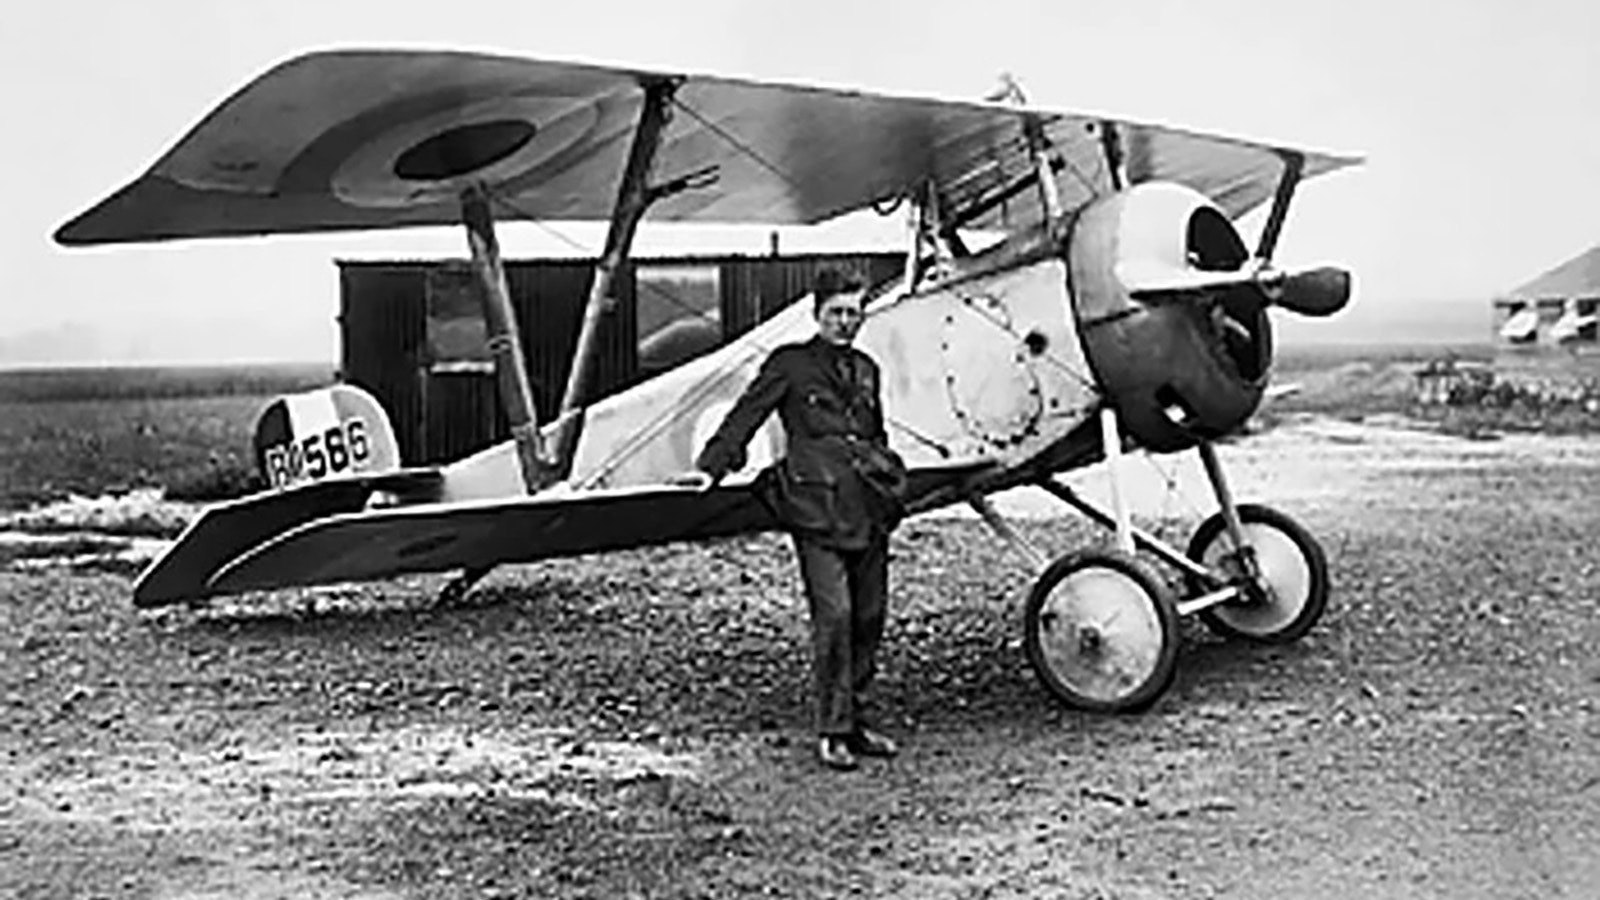 Canadian World War I flying ace Billy Bishop shot down 45 enemy aircraft in his French Nieuport 17 biplane.